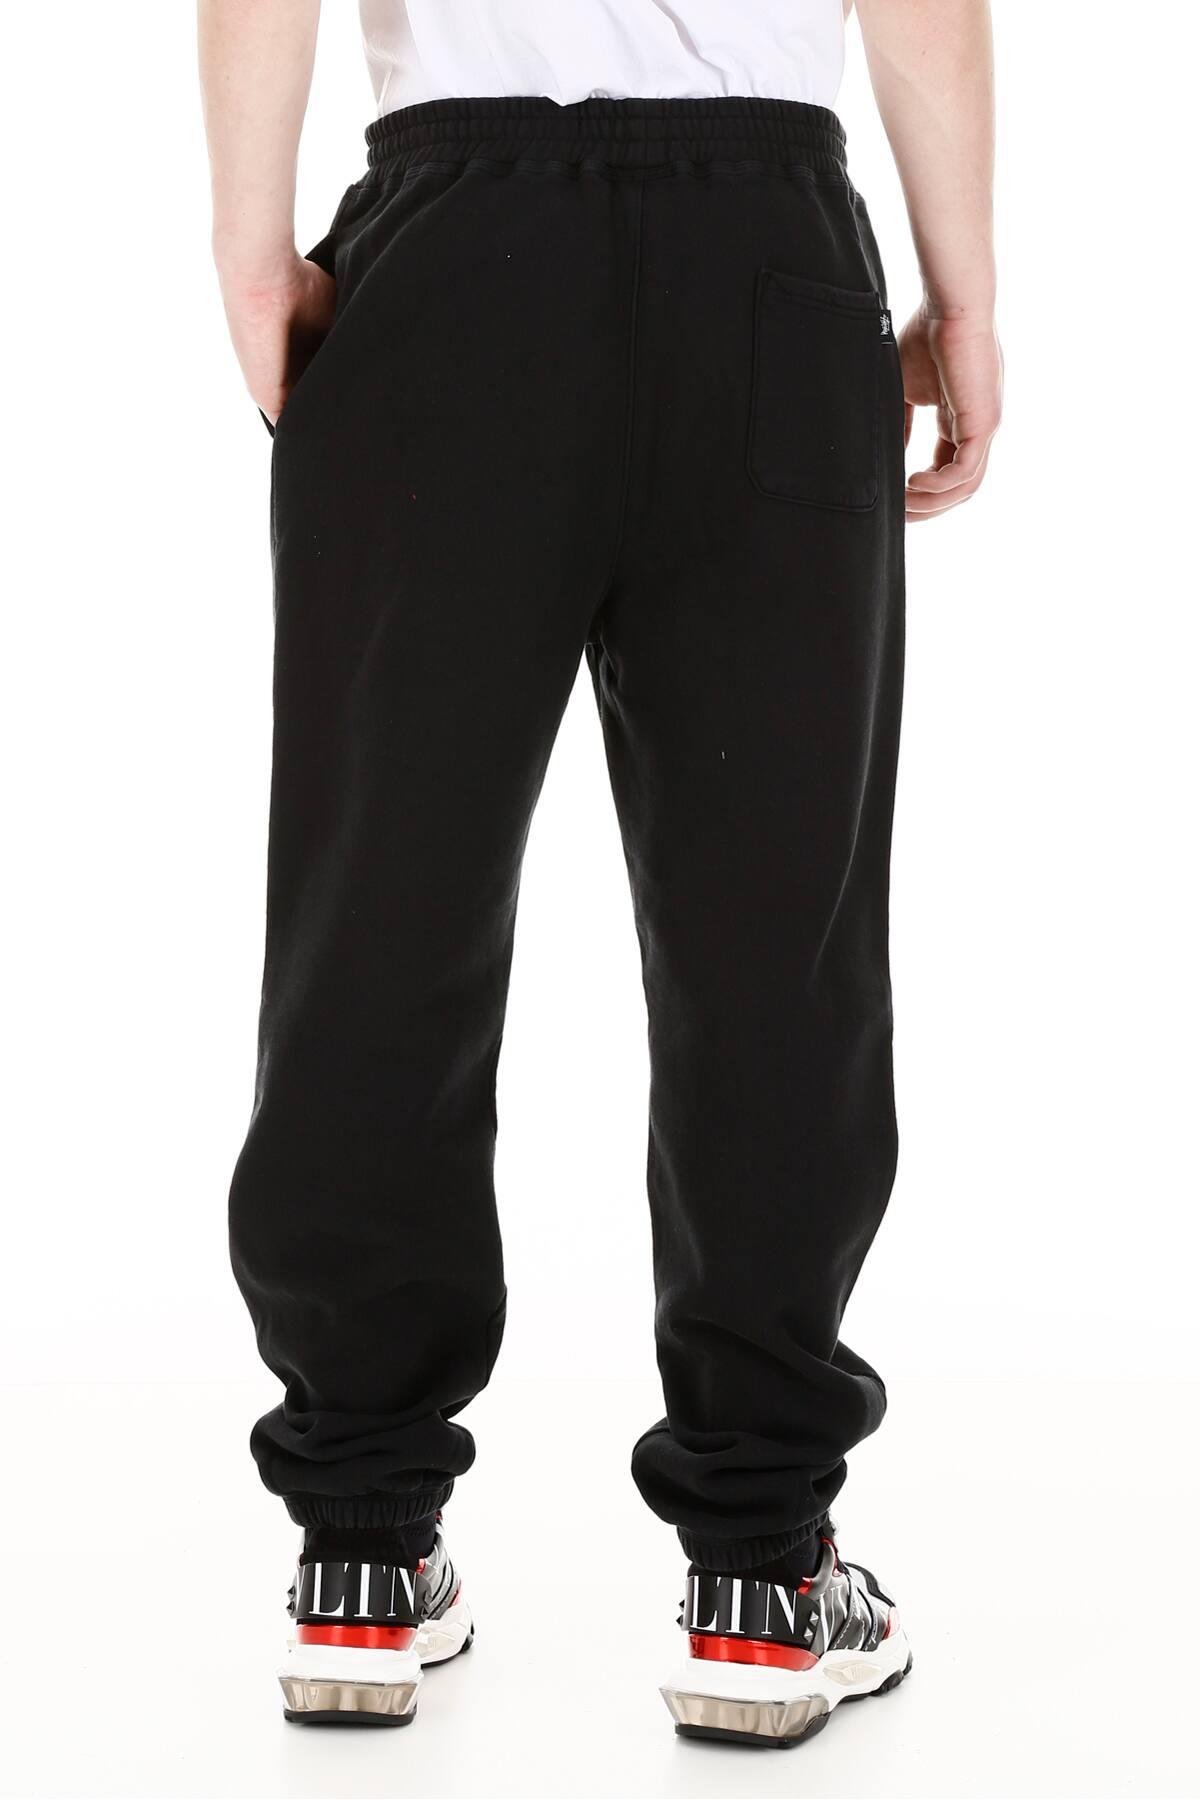 Stussy Cotton Logo Joggers in Black for Men - Lyst